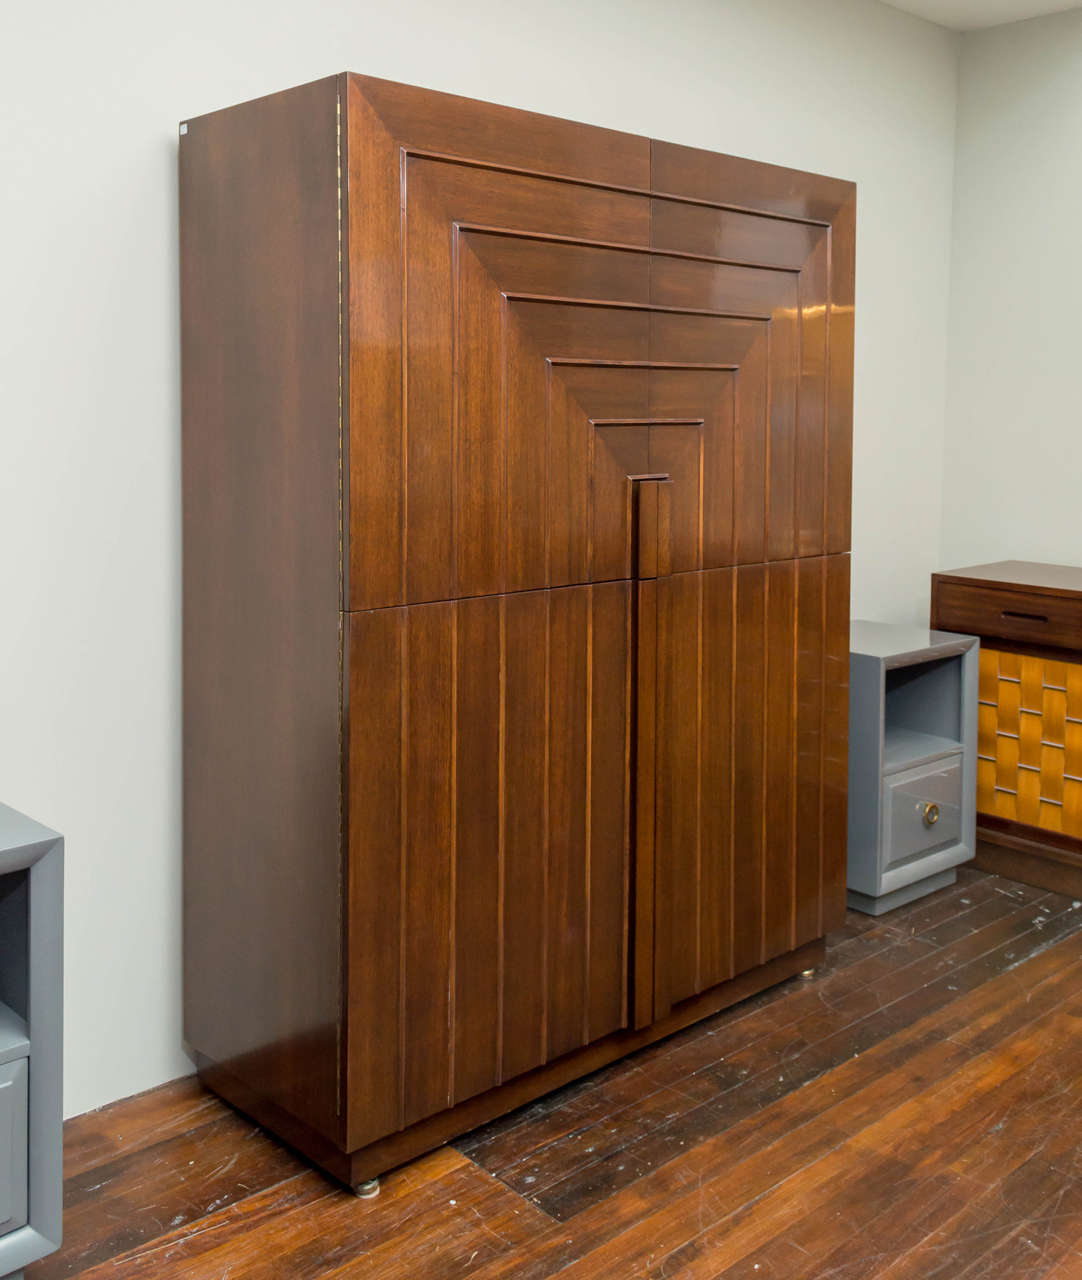 Rare and stunning T.H. Robsjohn-Gibbings design cabinet for Widdicomb Furniture Company.
Manufactured from walnut with four equal size symmetric doors it is the perfect storage cabinet for living or dining rooms.
Fitted interiors comprise nine